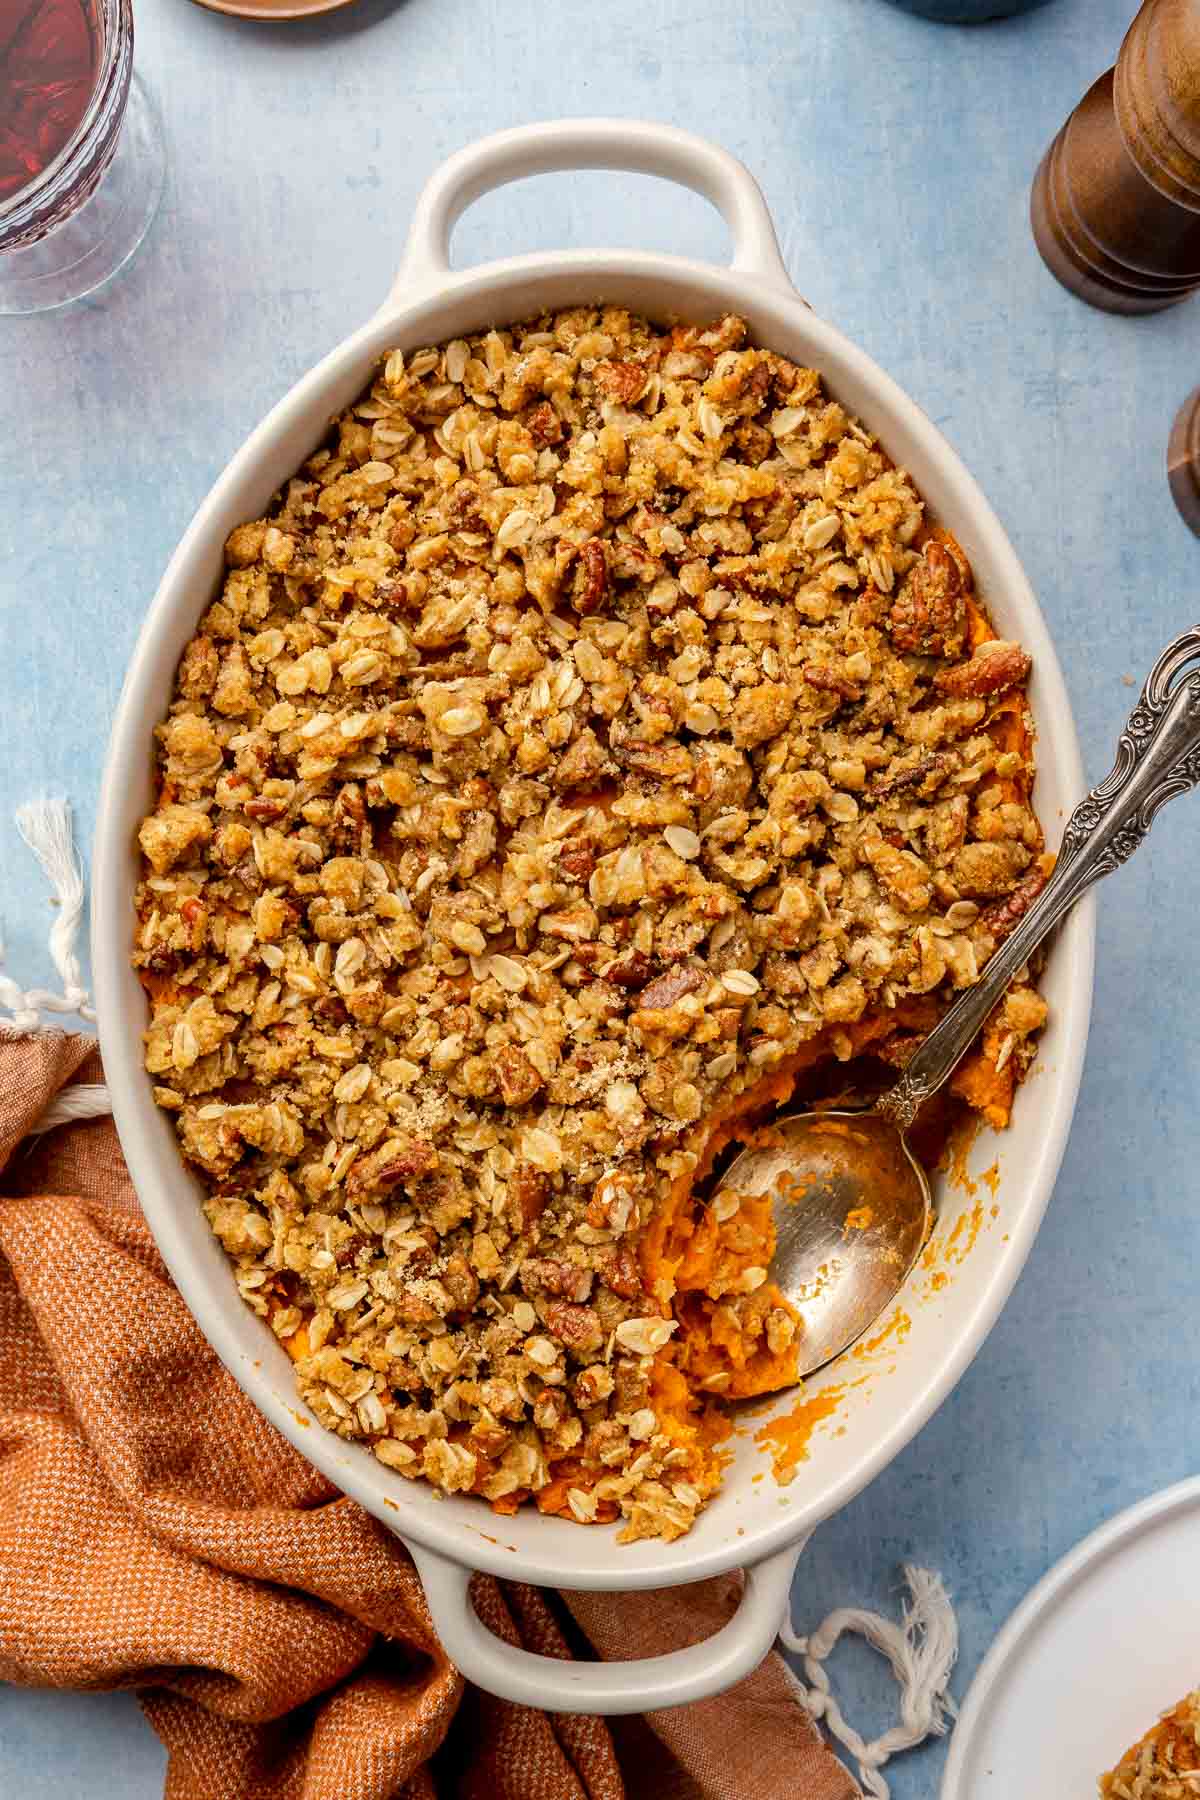 Sweet potato casserole in a white dish with a serving spoon.